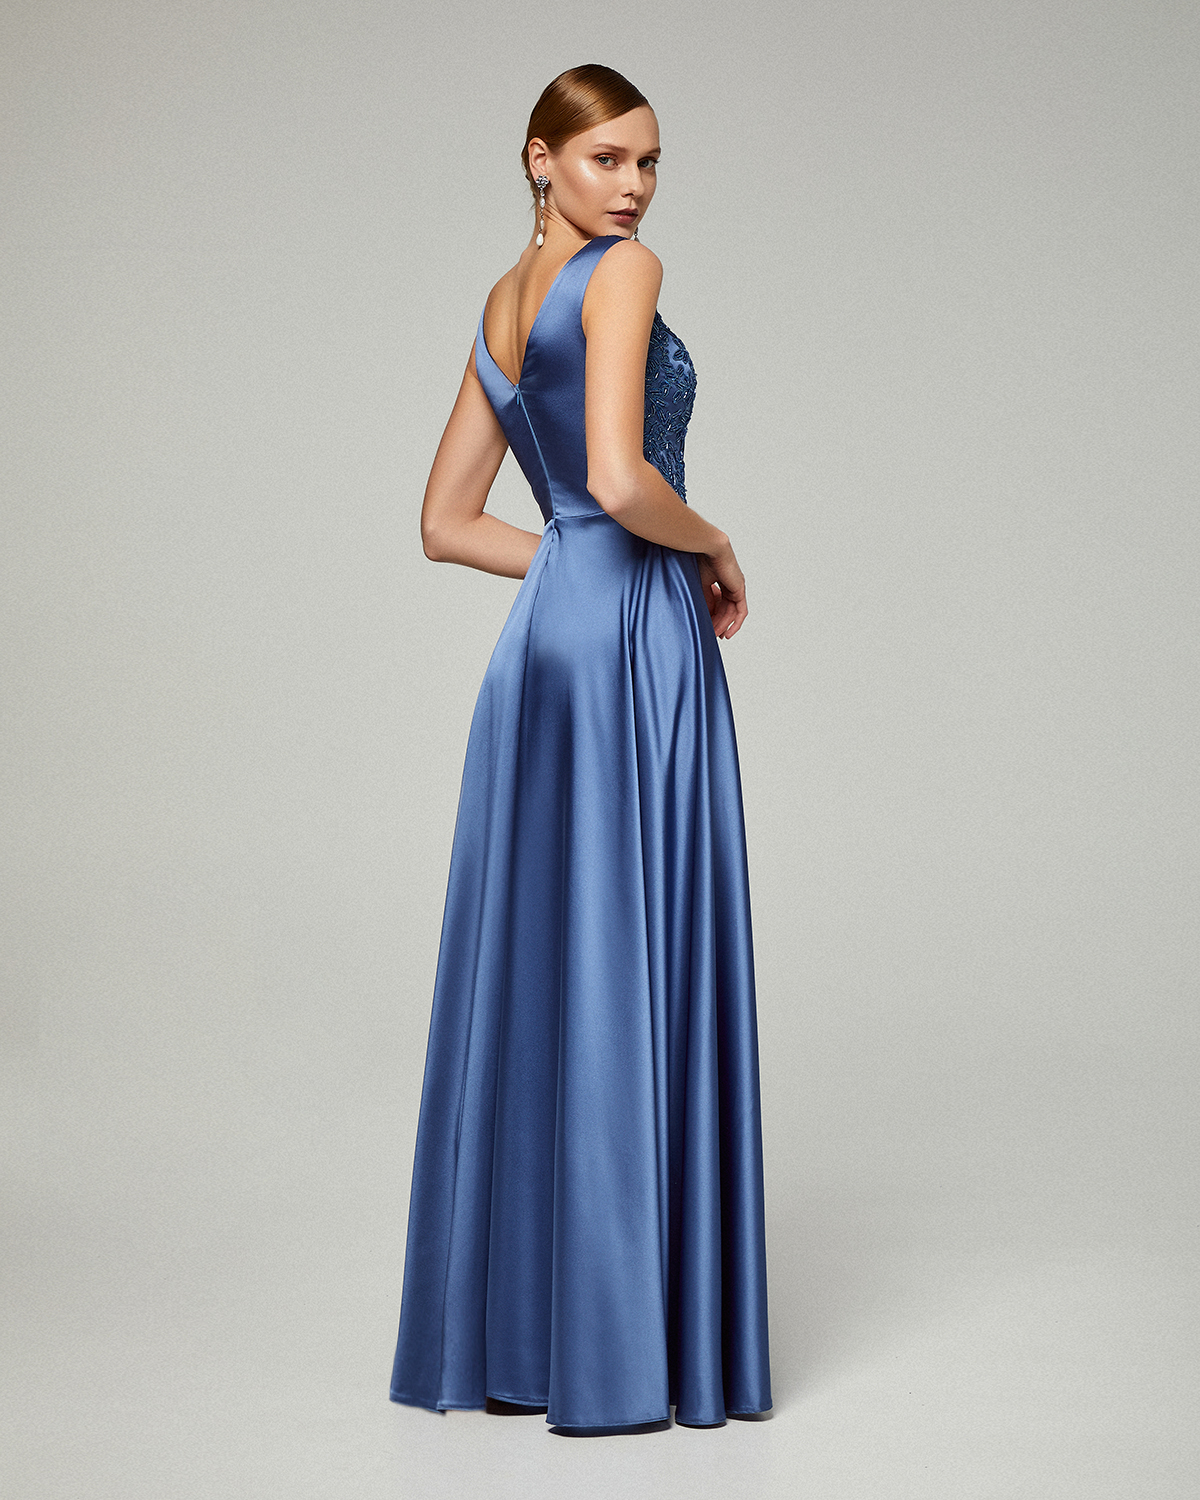 Long evening satin dress for the mother of the bride